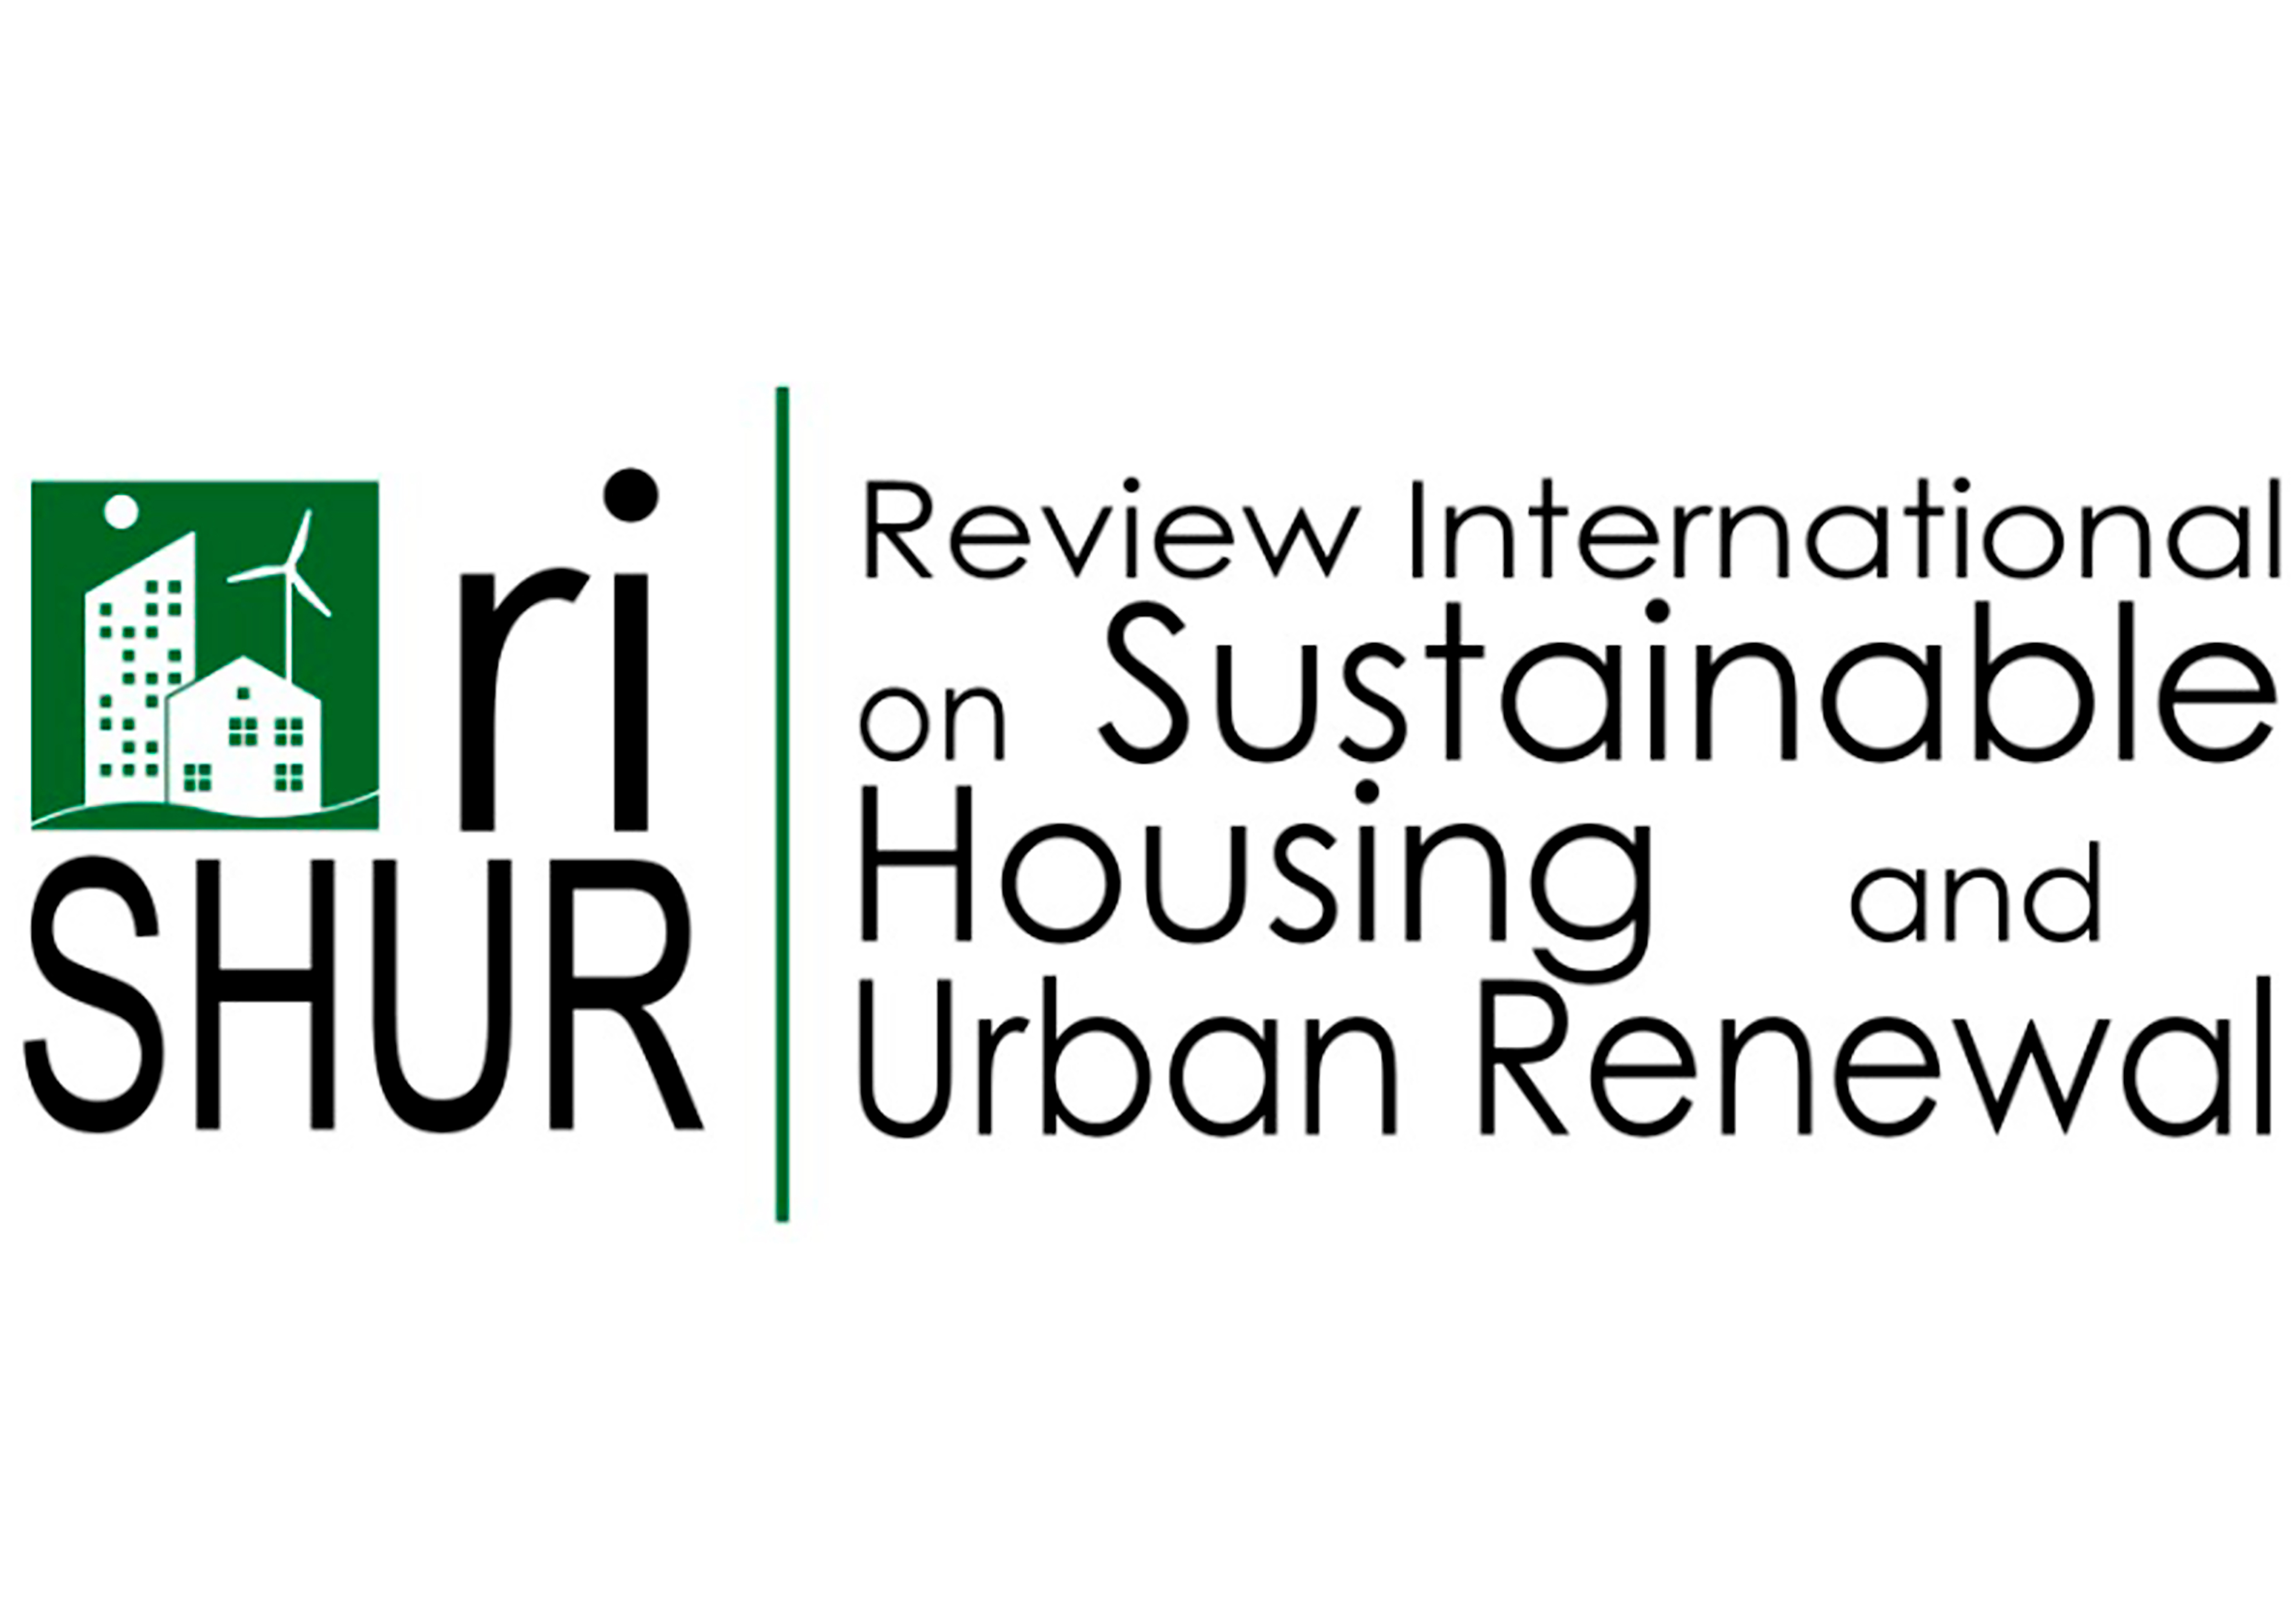 Review International on Sustainable Housing and Urban Renewal